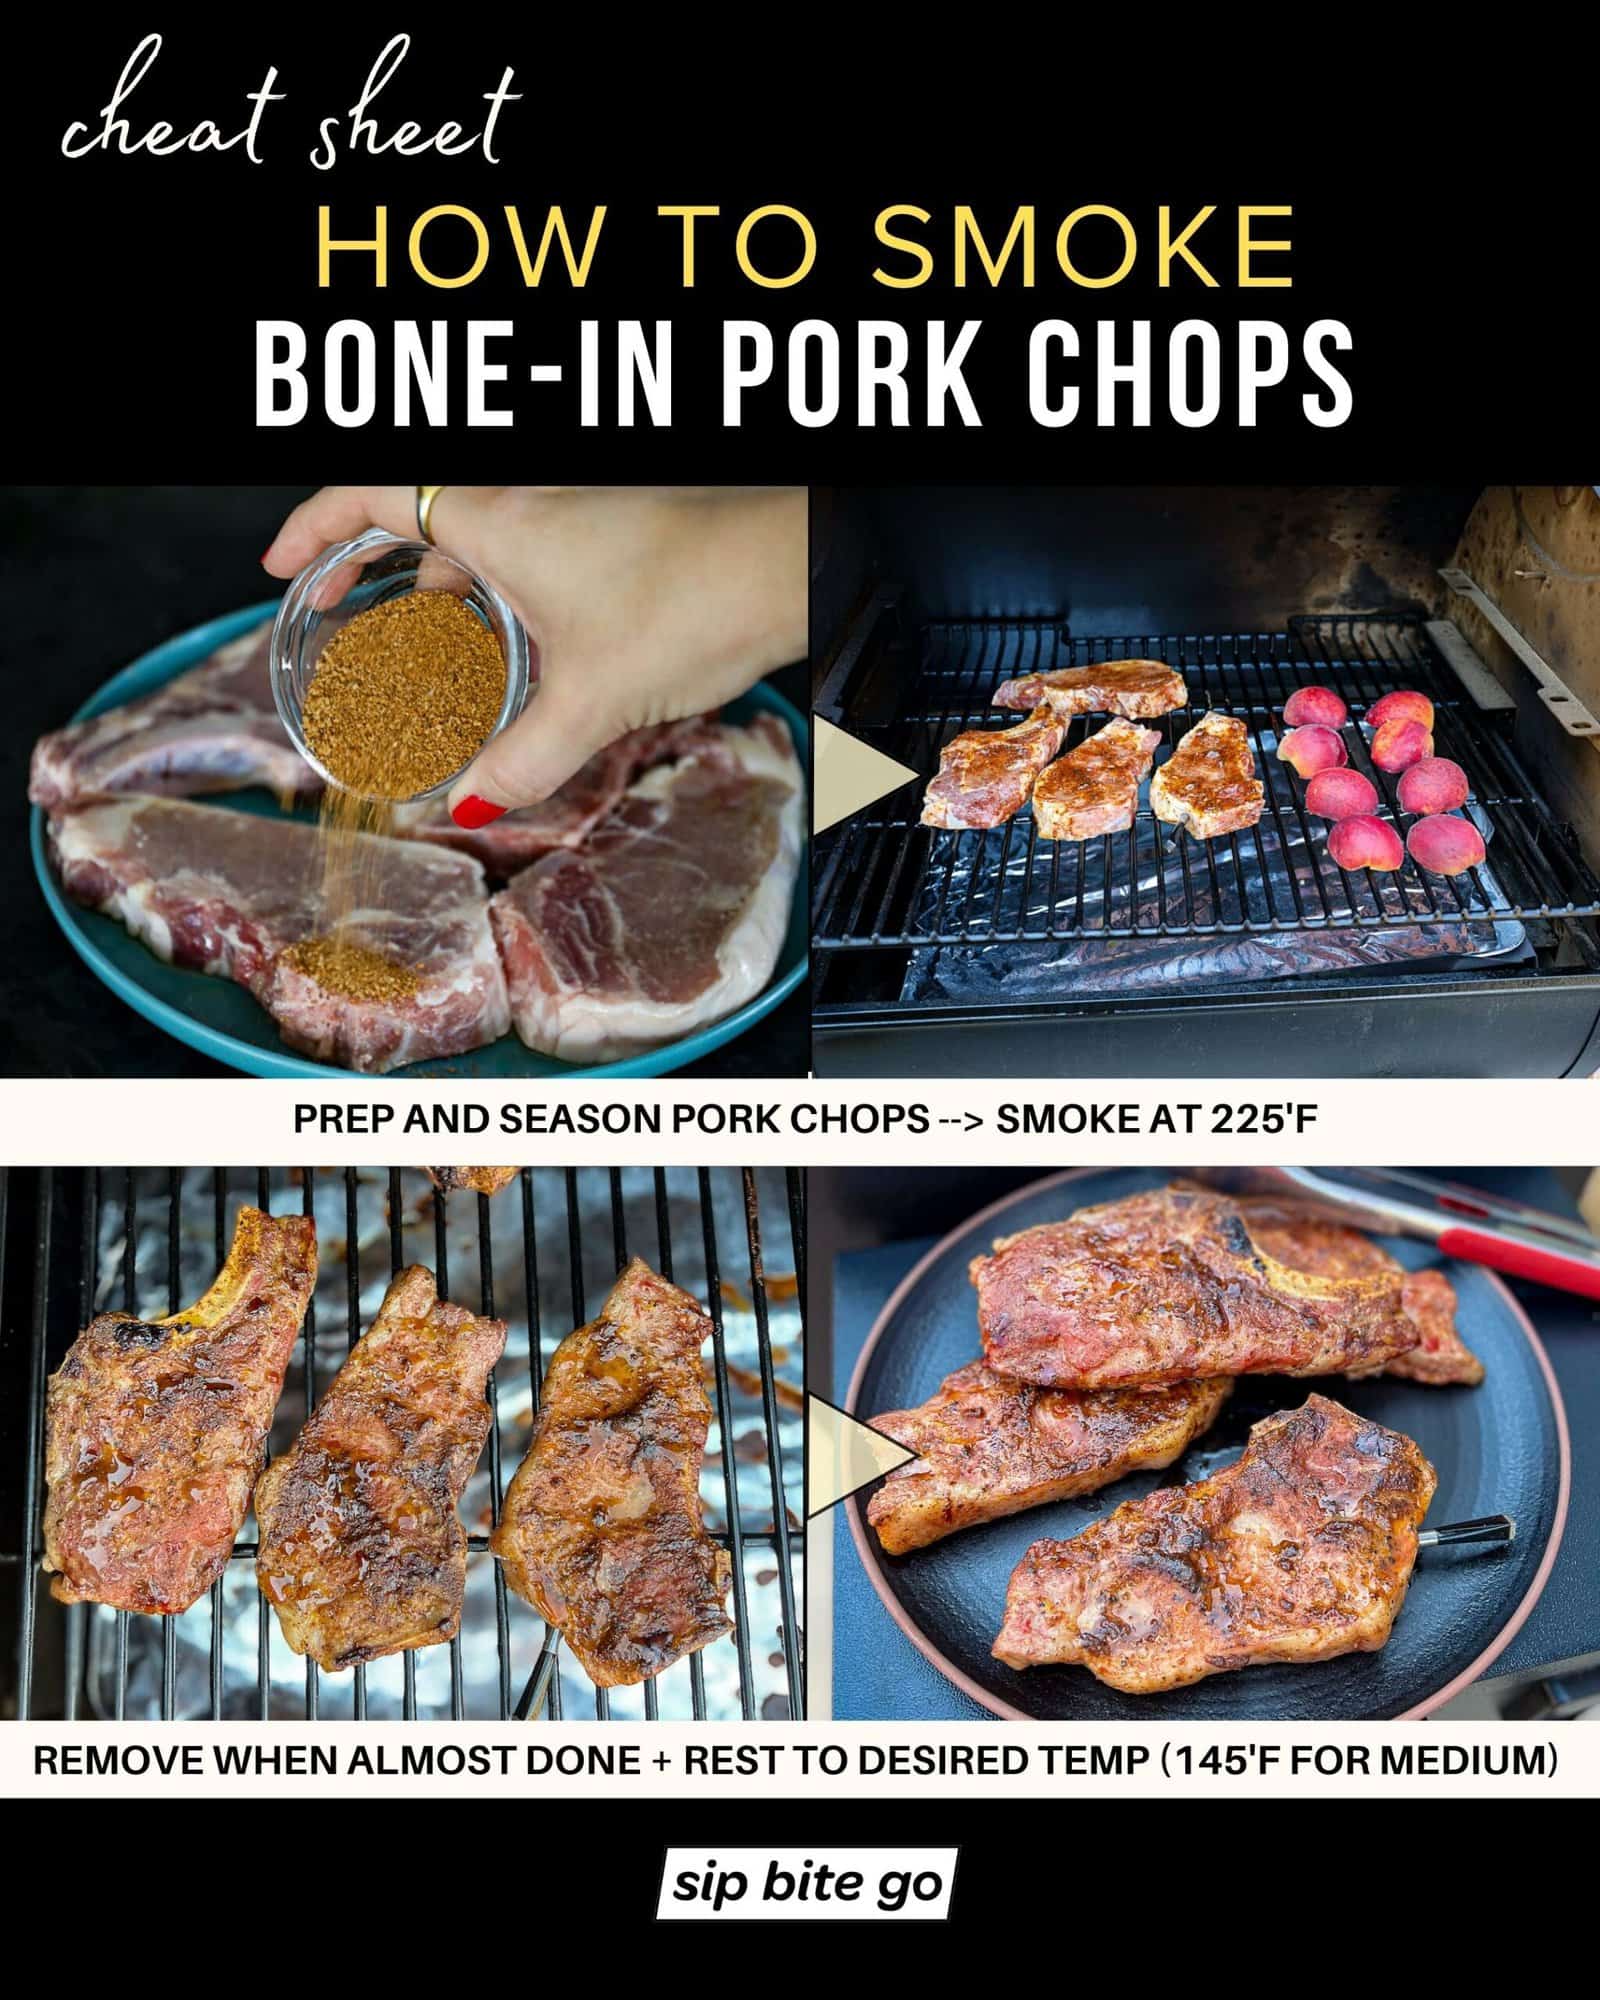 Infographic with recipe steps and captions for smoking bone in pork chops on the Traeger pellet grill